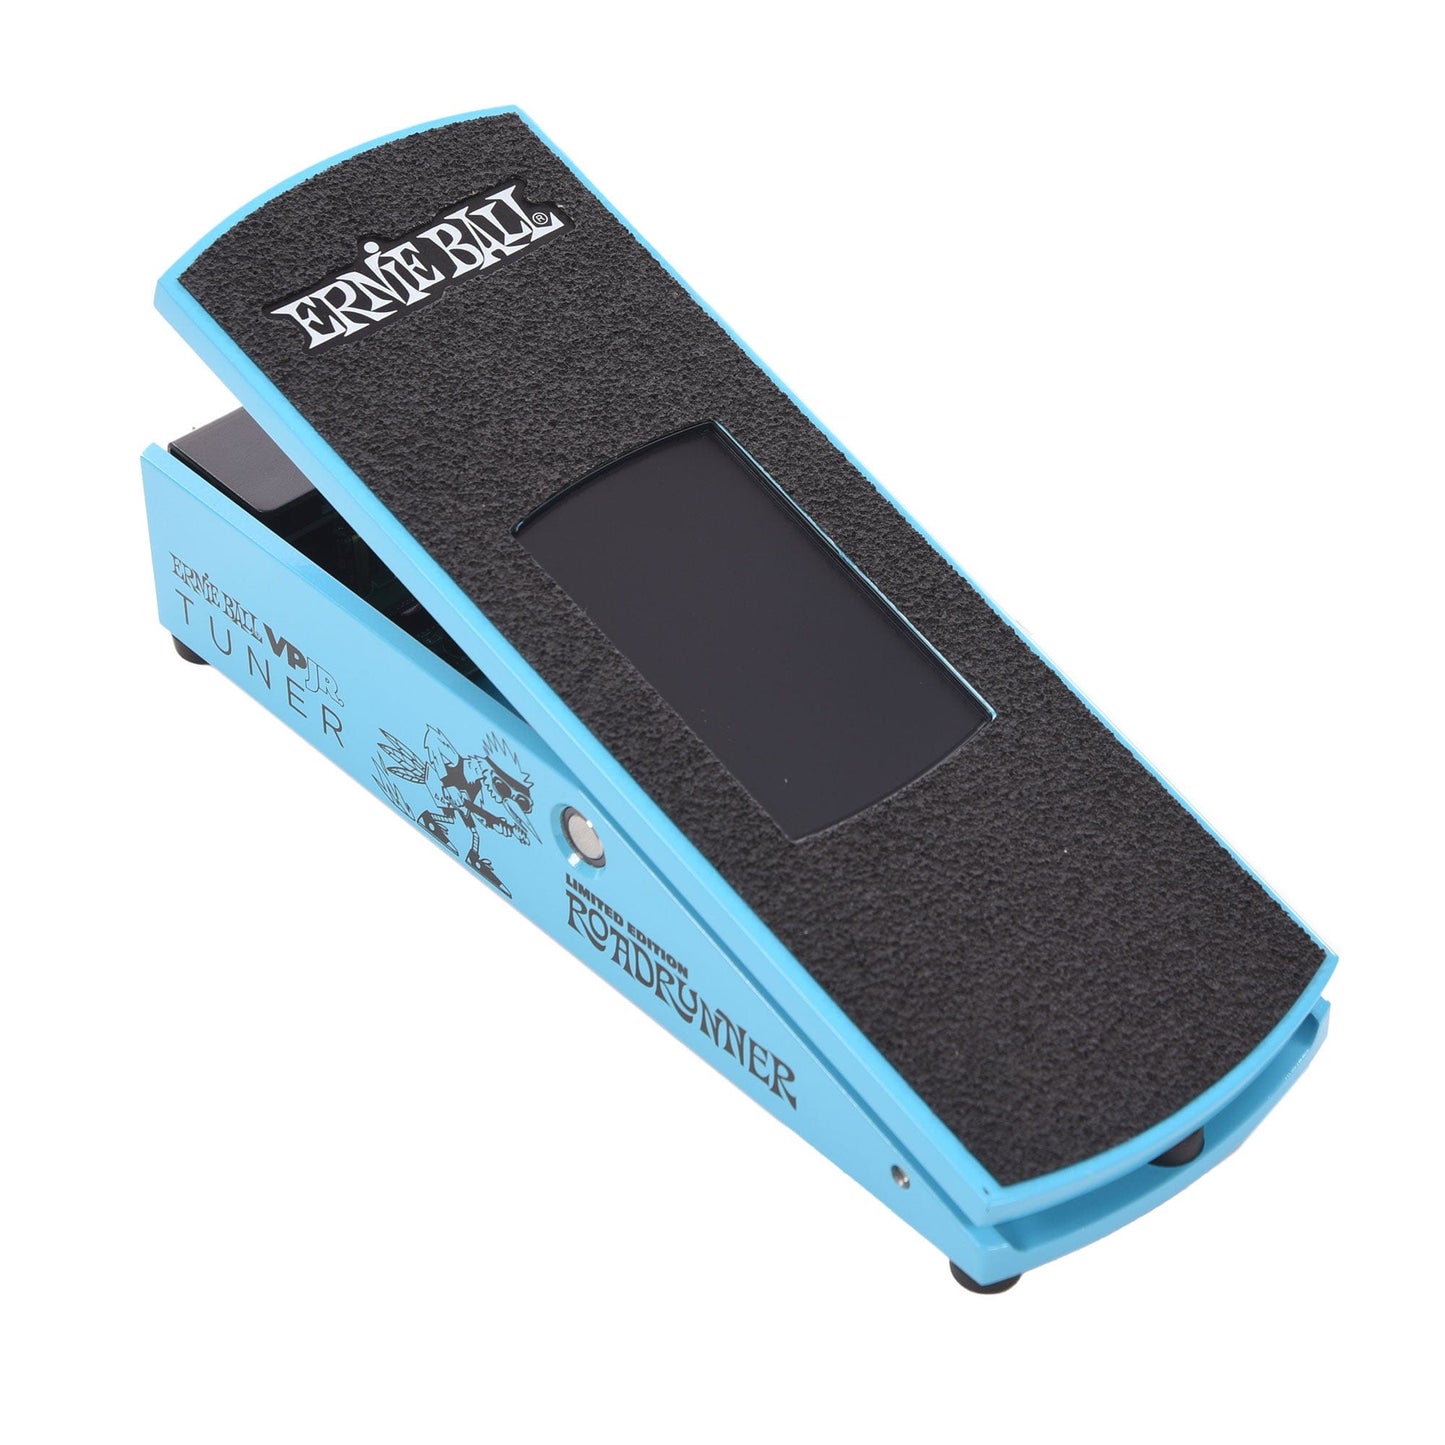 Ernie Ball Limited Edition VP JR Pedal Road Runner Finish Effects and Pedals / Tuning Pedals